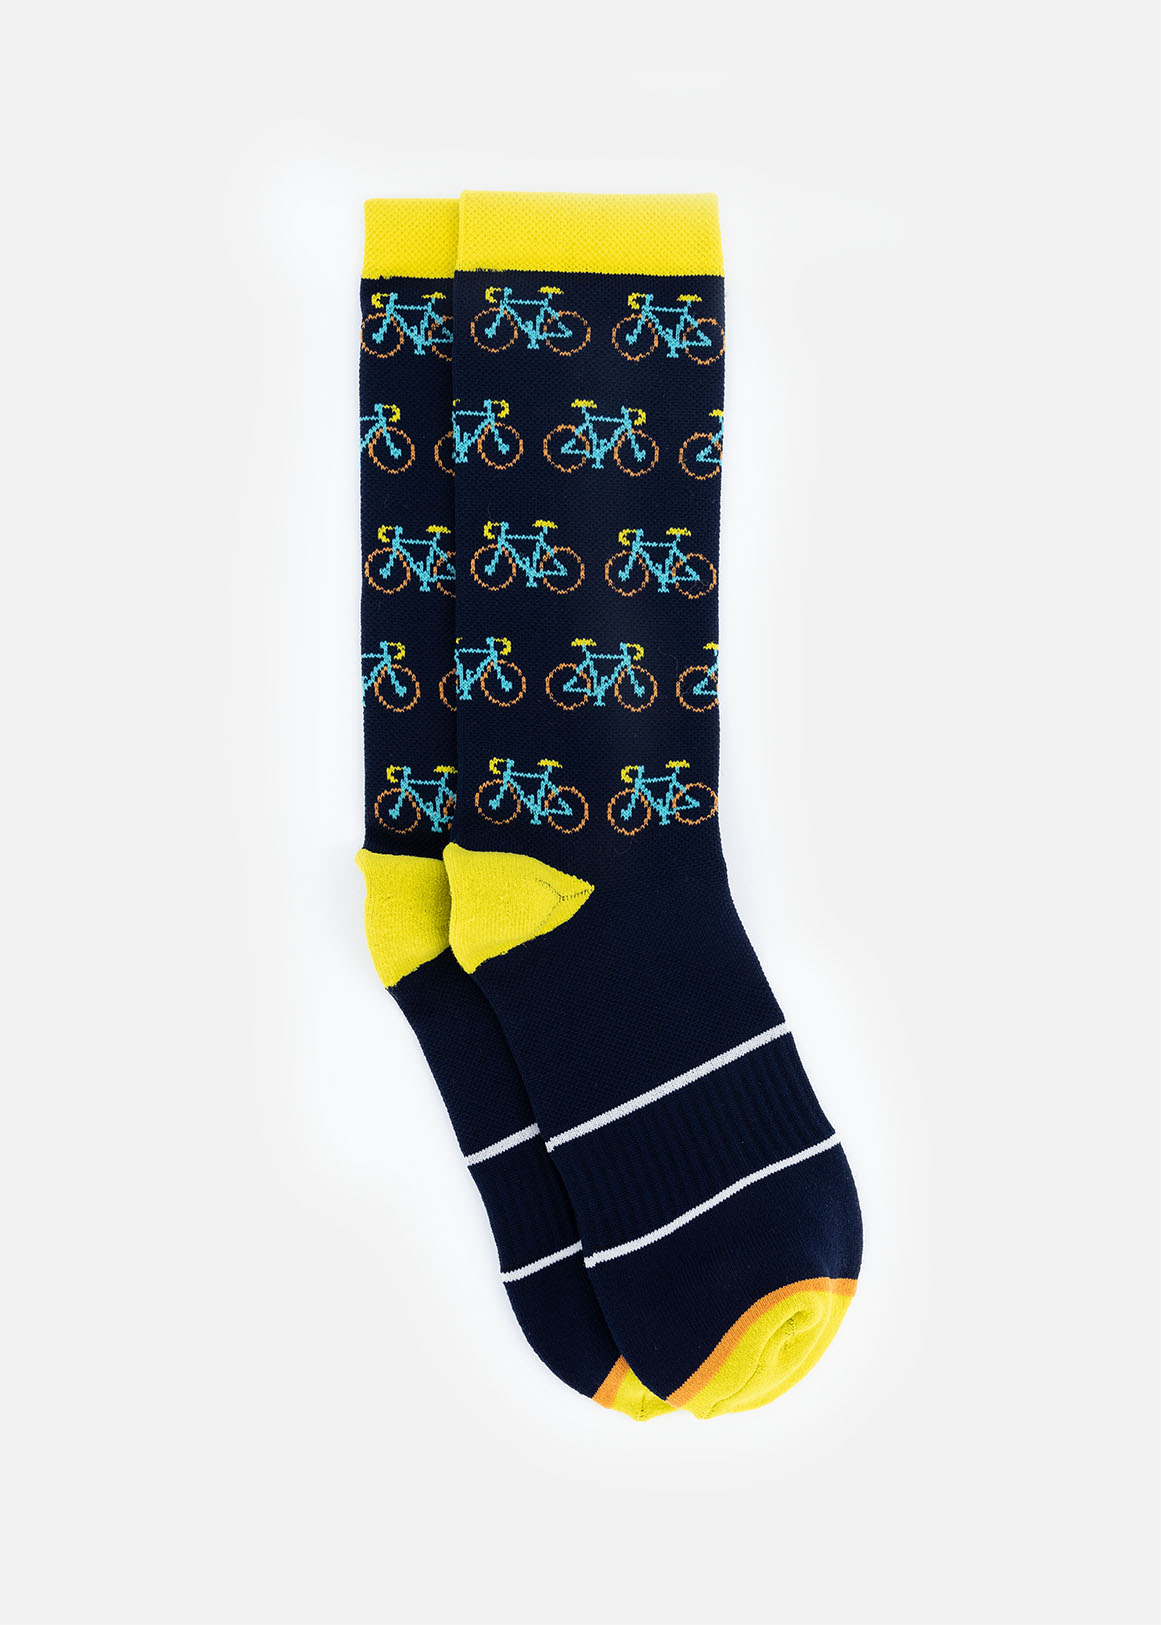 COOLTECH Bicycle Multi Sport Performance Socks | Woolworths.co.za